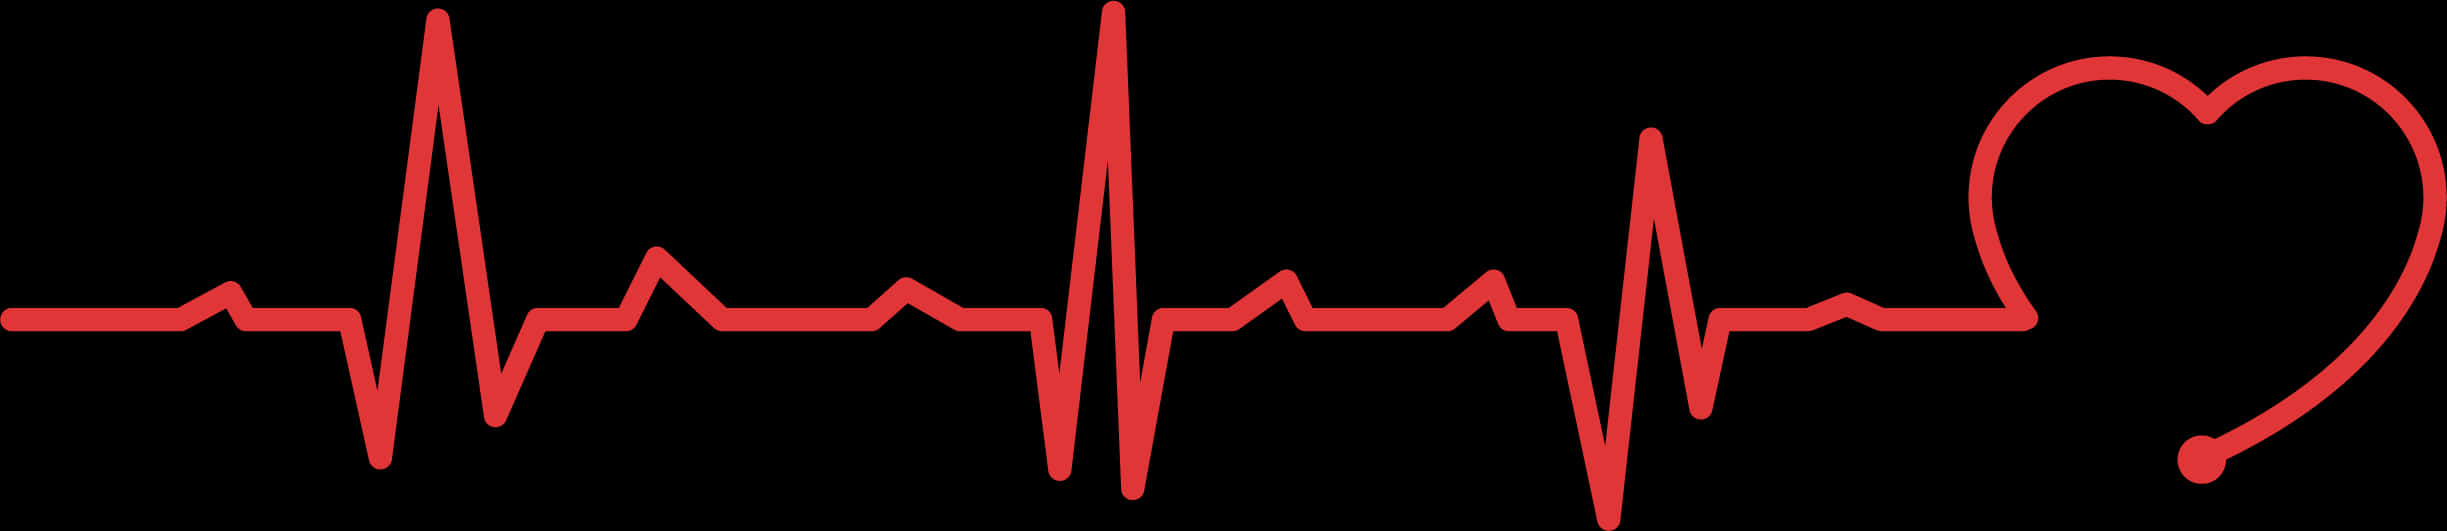 Heartbeat Electrocardiogram Line With Heart Shape PNG